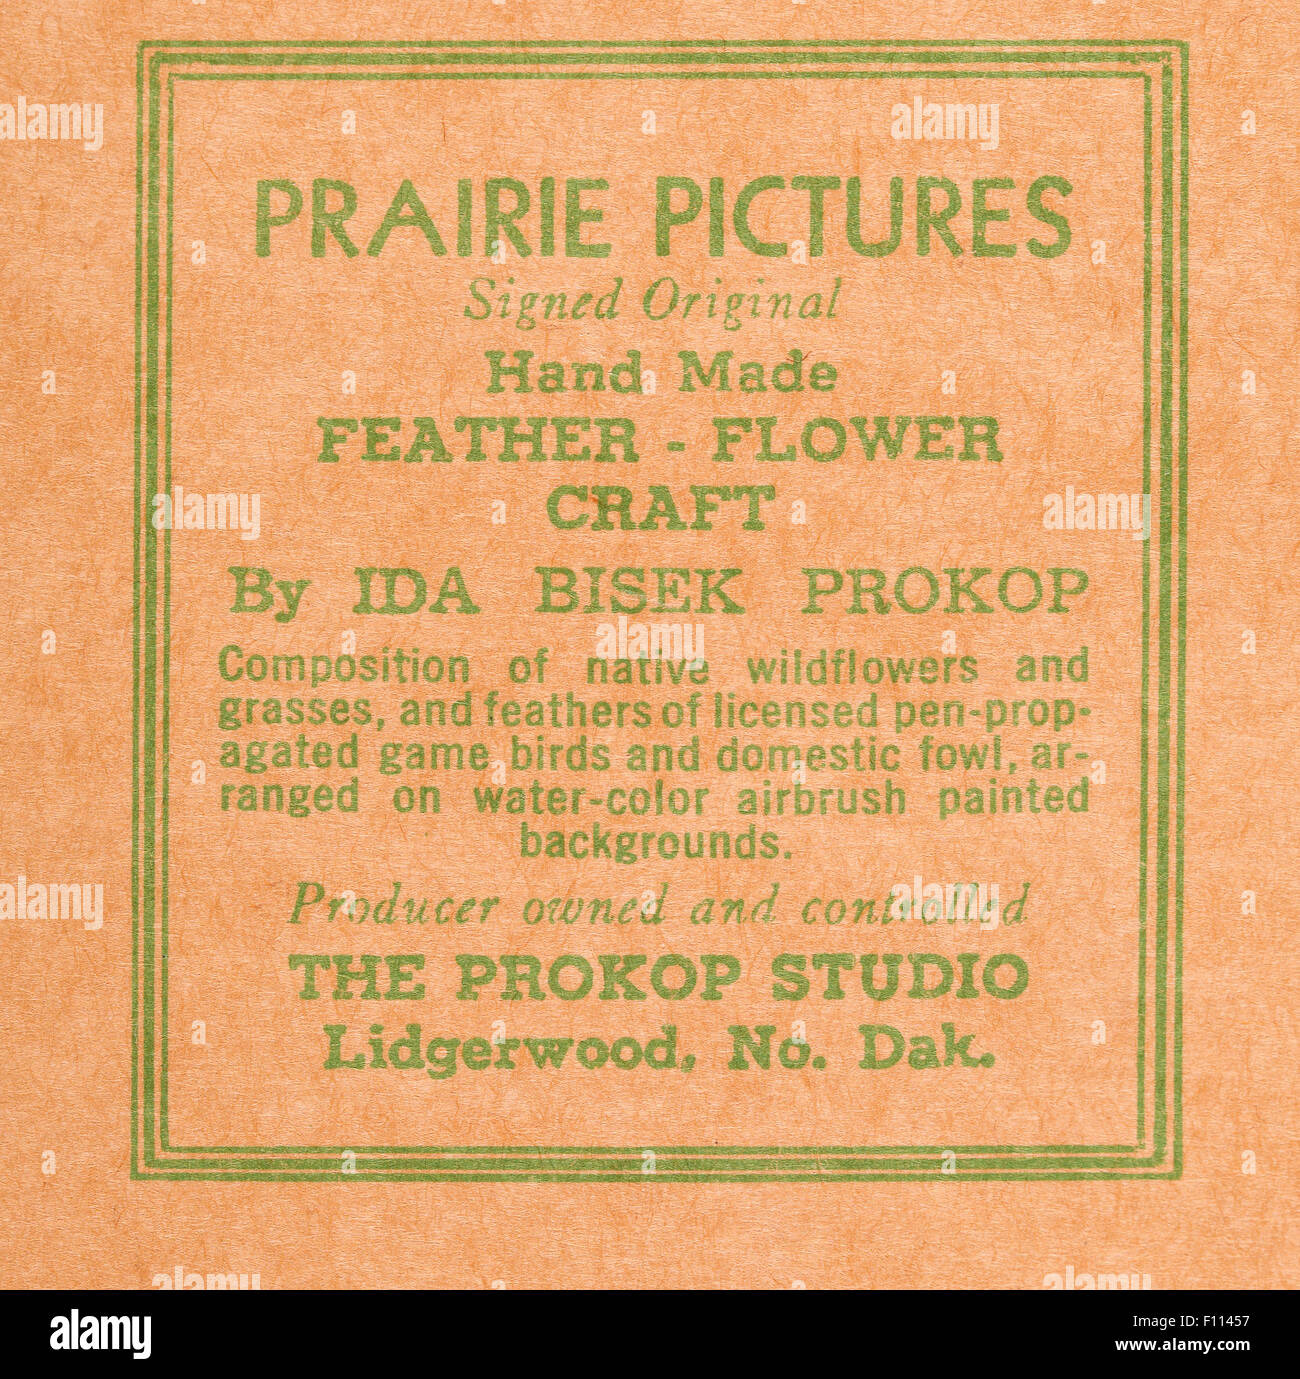 Prairie Pictures stamp on back of a 1940s framed collage by the North Dakota artist Ida Bisek Prokop Lee (1902-1990) Stock Photo